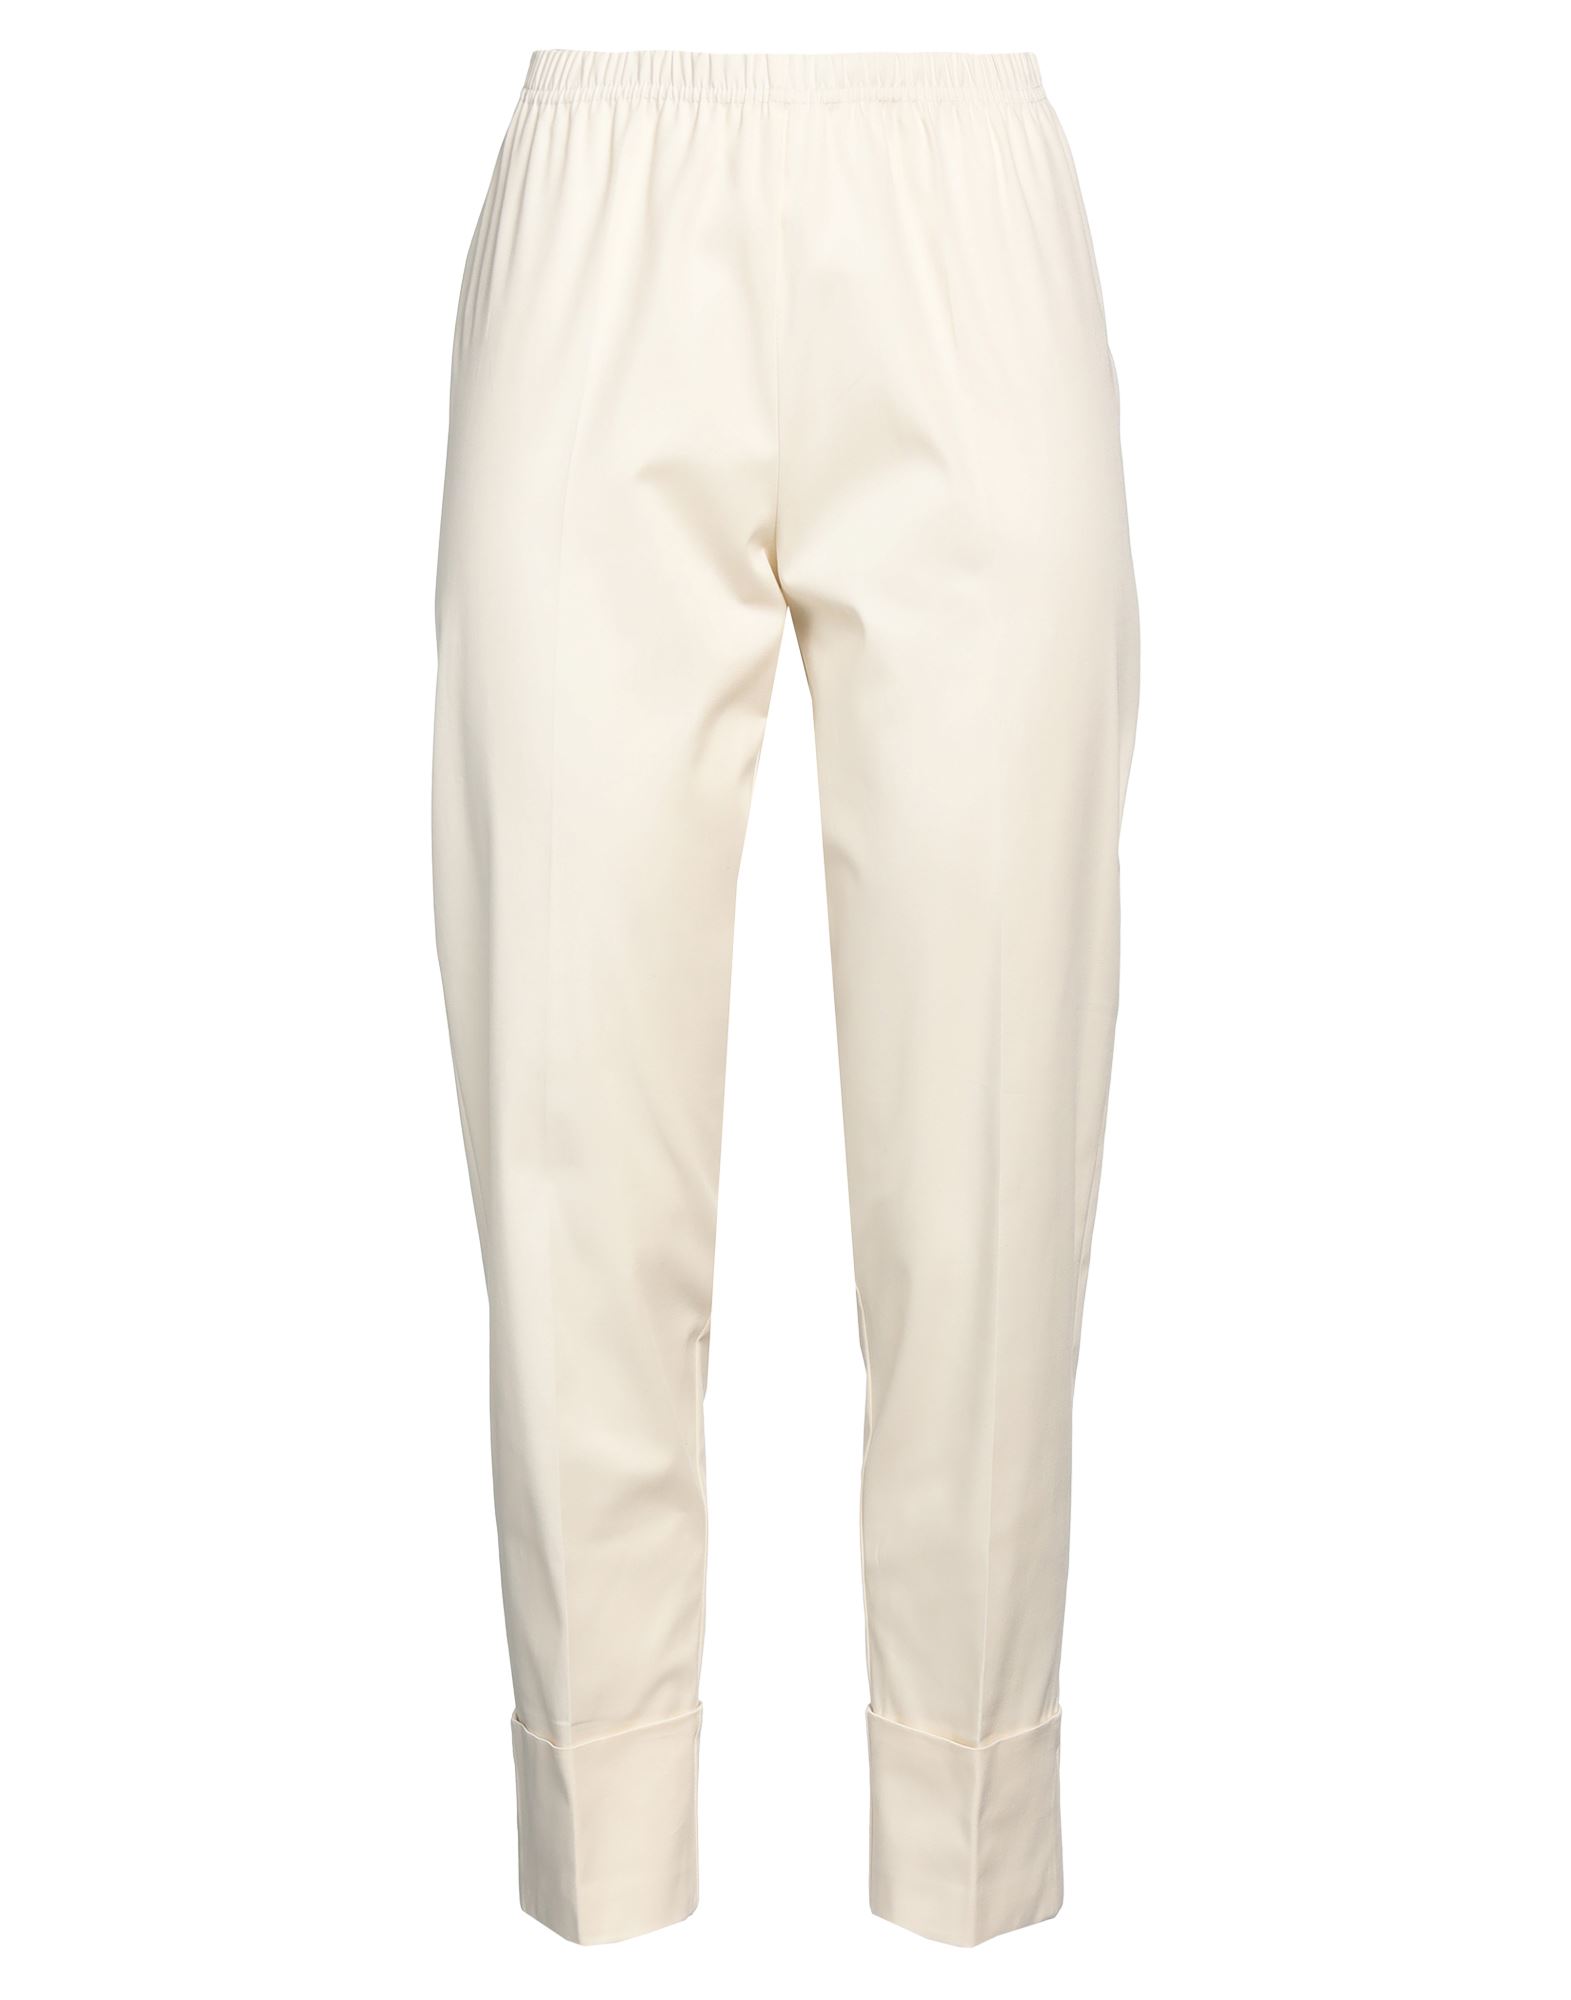 Corinna Caon Pants In White